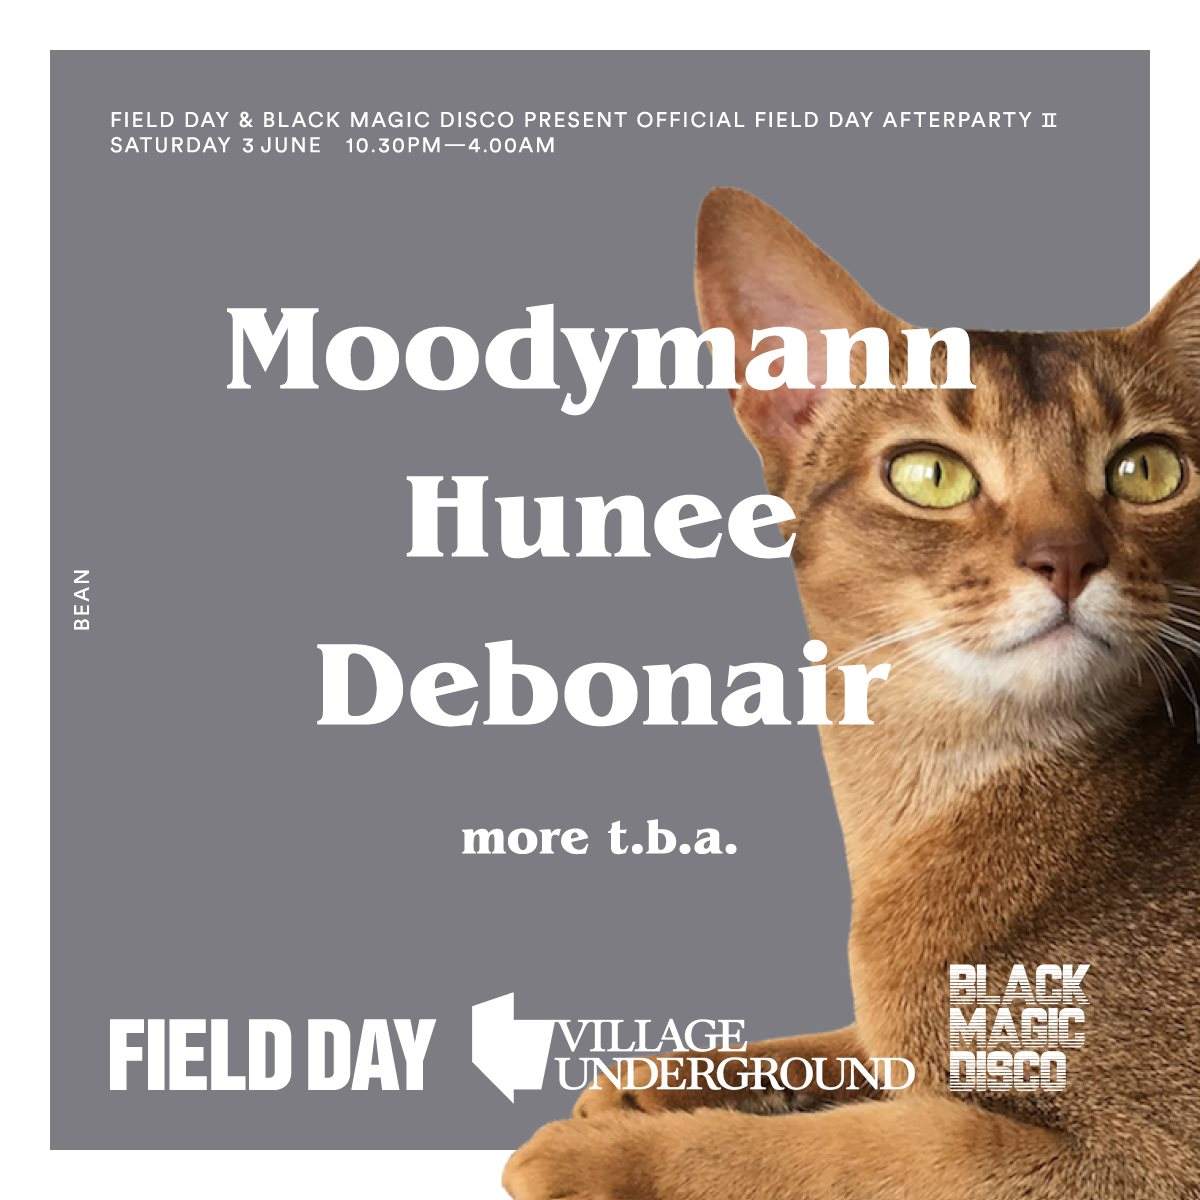 Field Day Official After Party 2 with Black Magic Disco - Moodymann, Hunee - フライヤー表